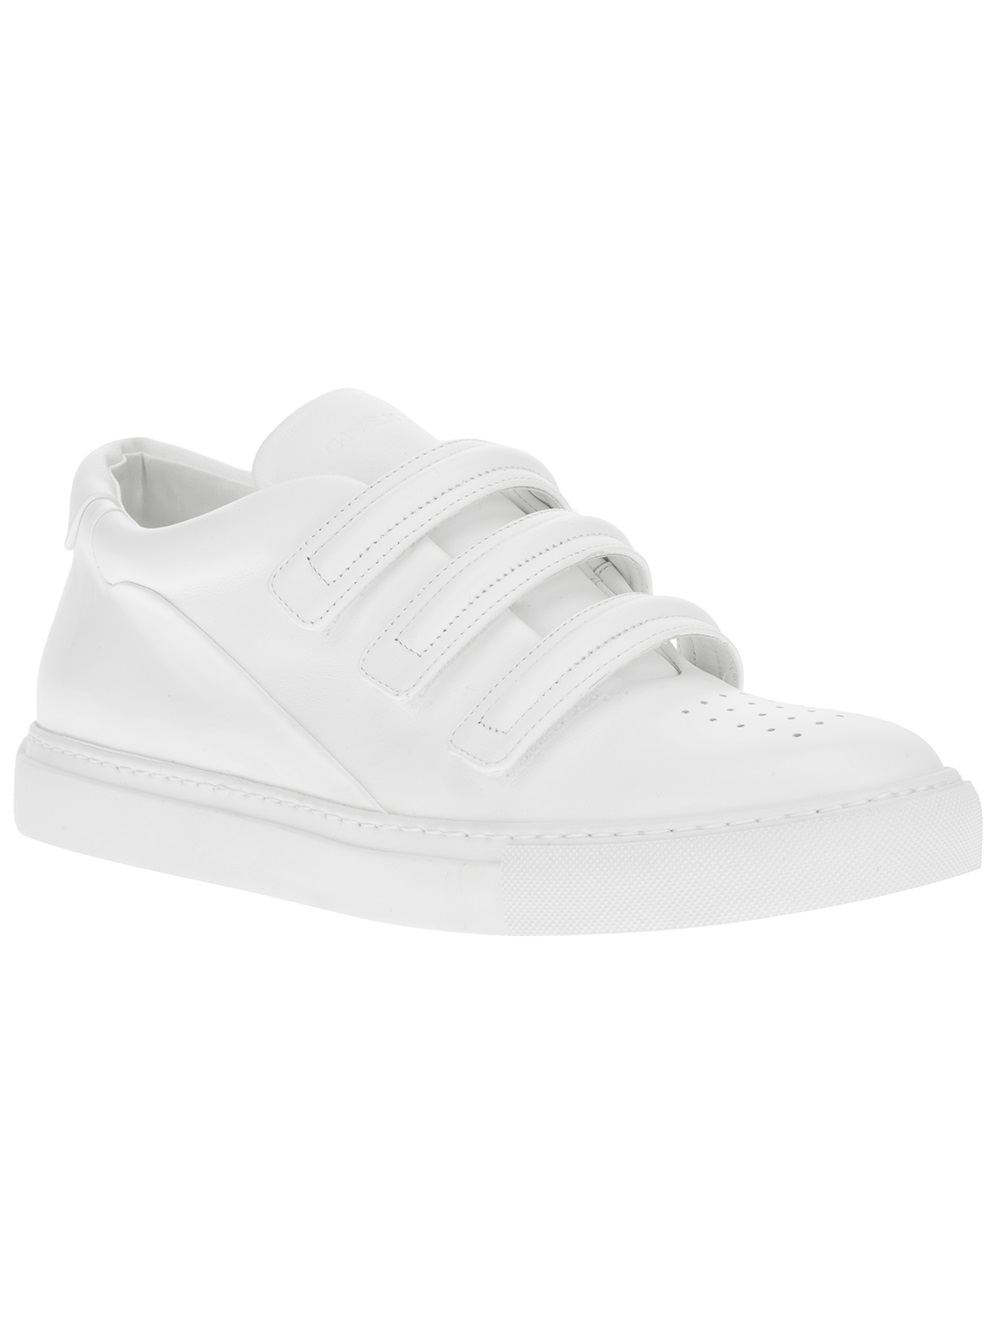 Givenchy Velcro Sneakers in White for Men | Lyst